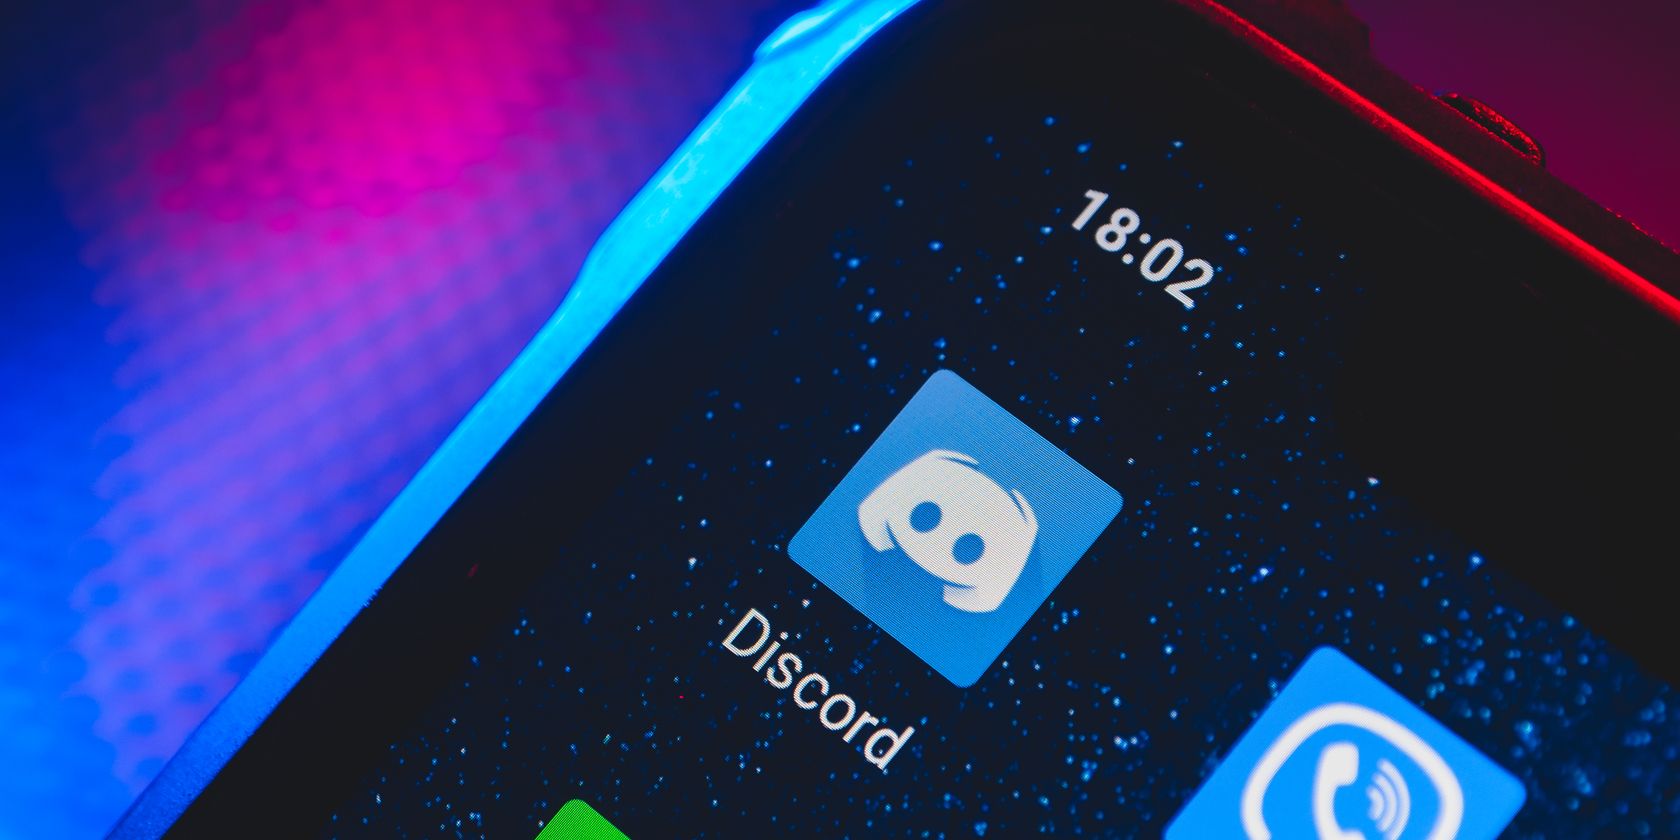 Discord and Sony PlayStation tie the knot with full PSN account integration  and PS4/PS5 game activity profile display -  News